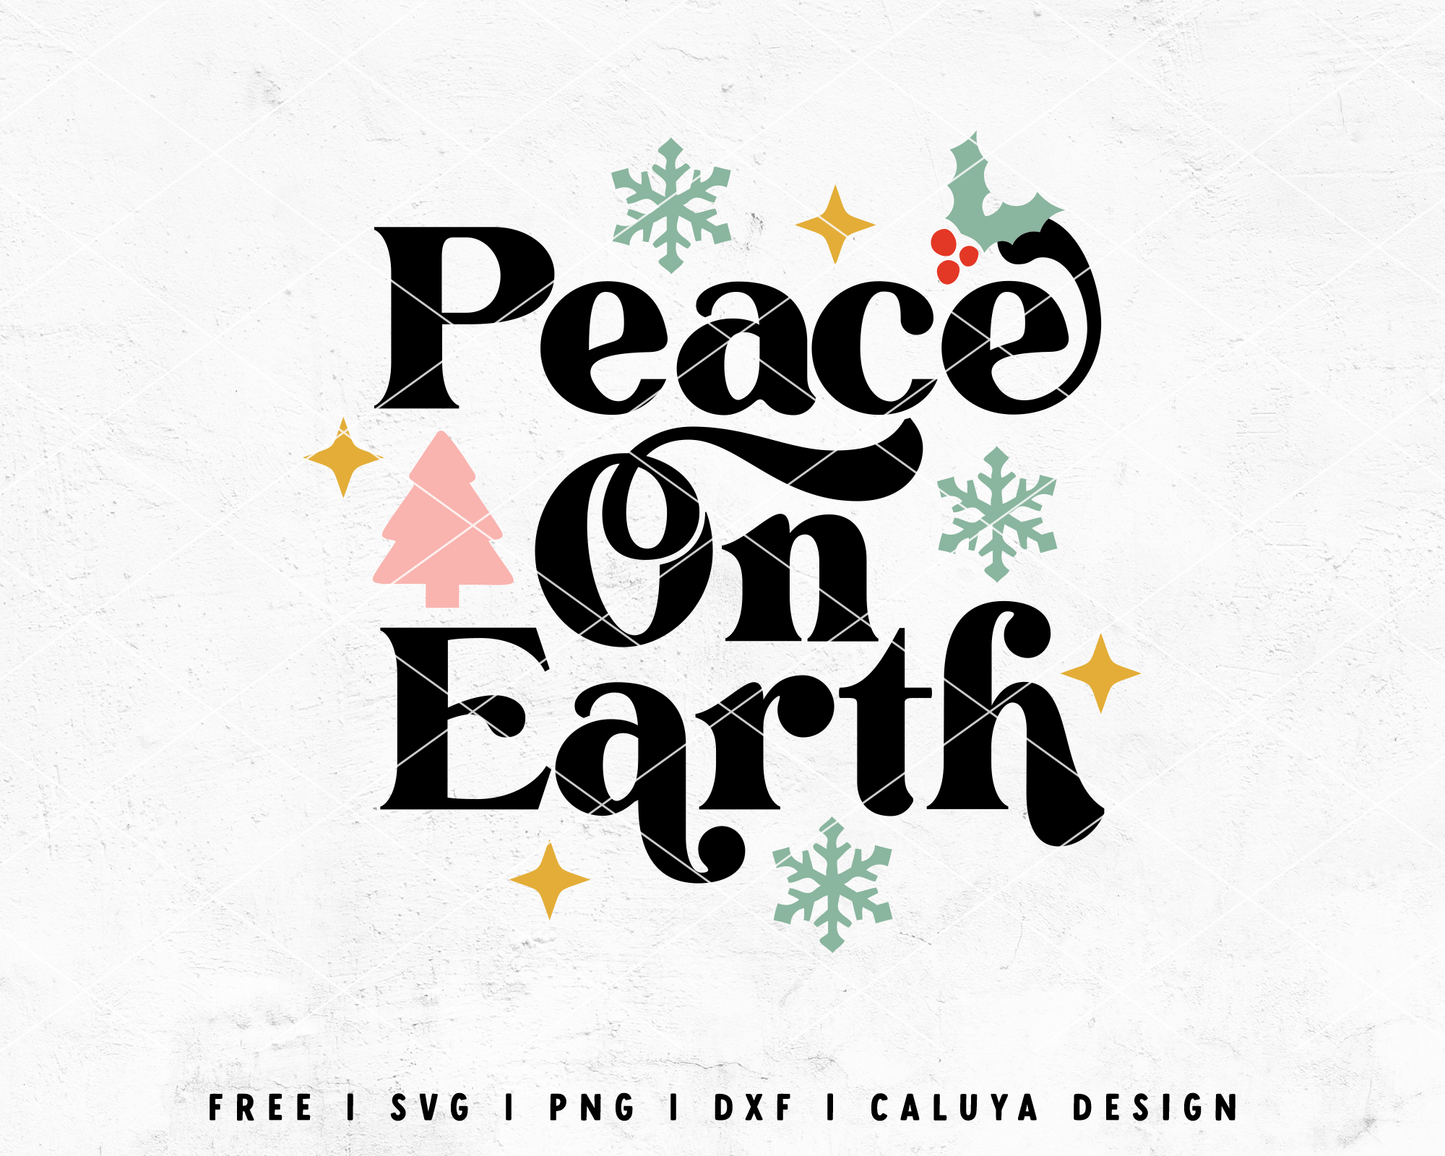 FREE Peach On Earth SVG | Christams Quote SVG Cut File for Cricut, Cameo Silhouette | Free SVG Cut File